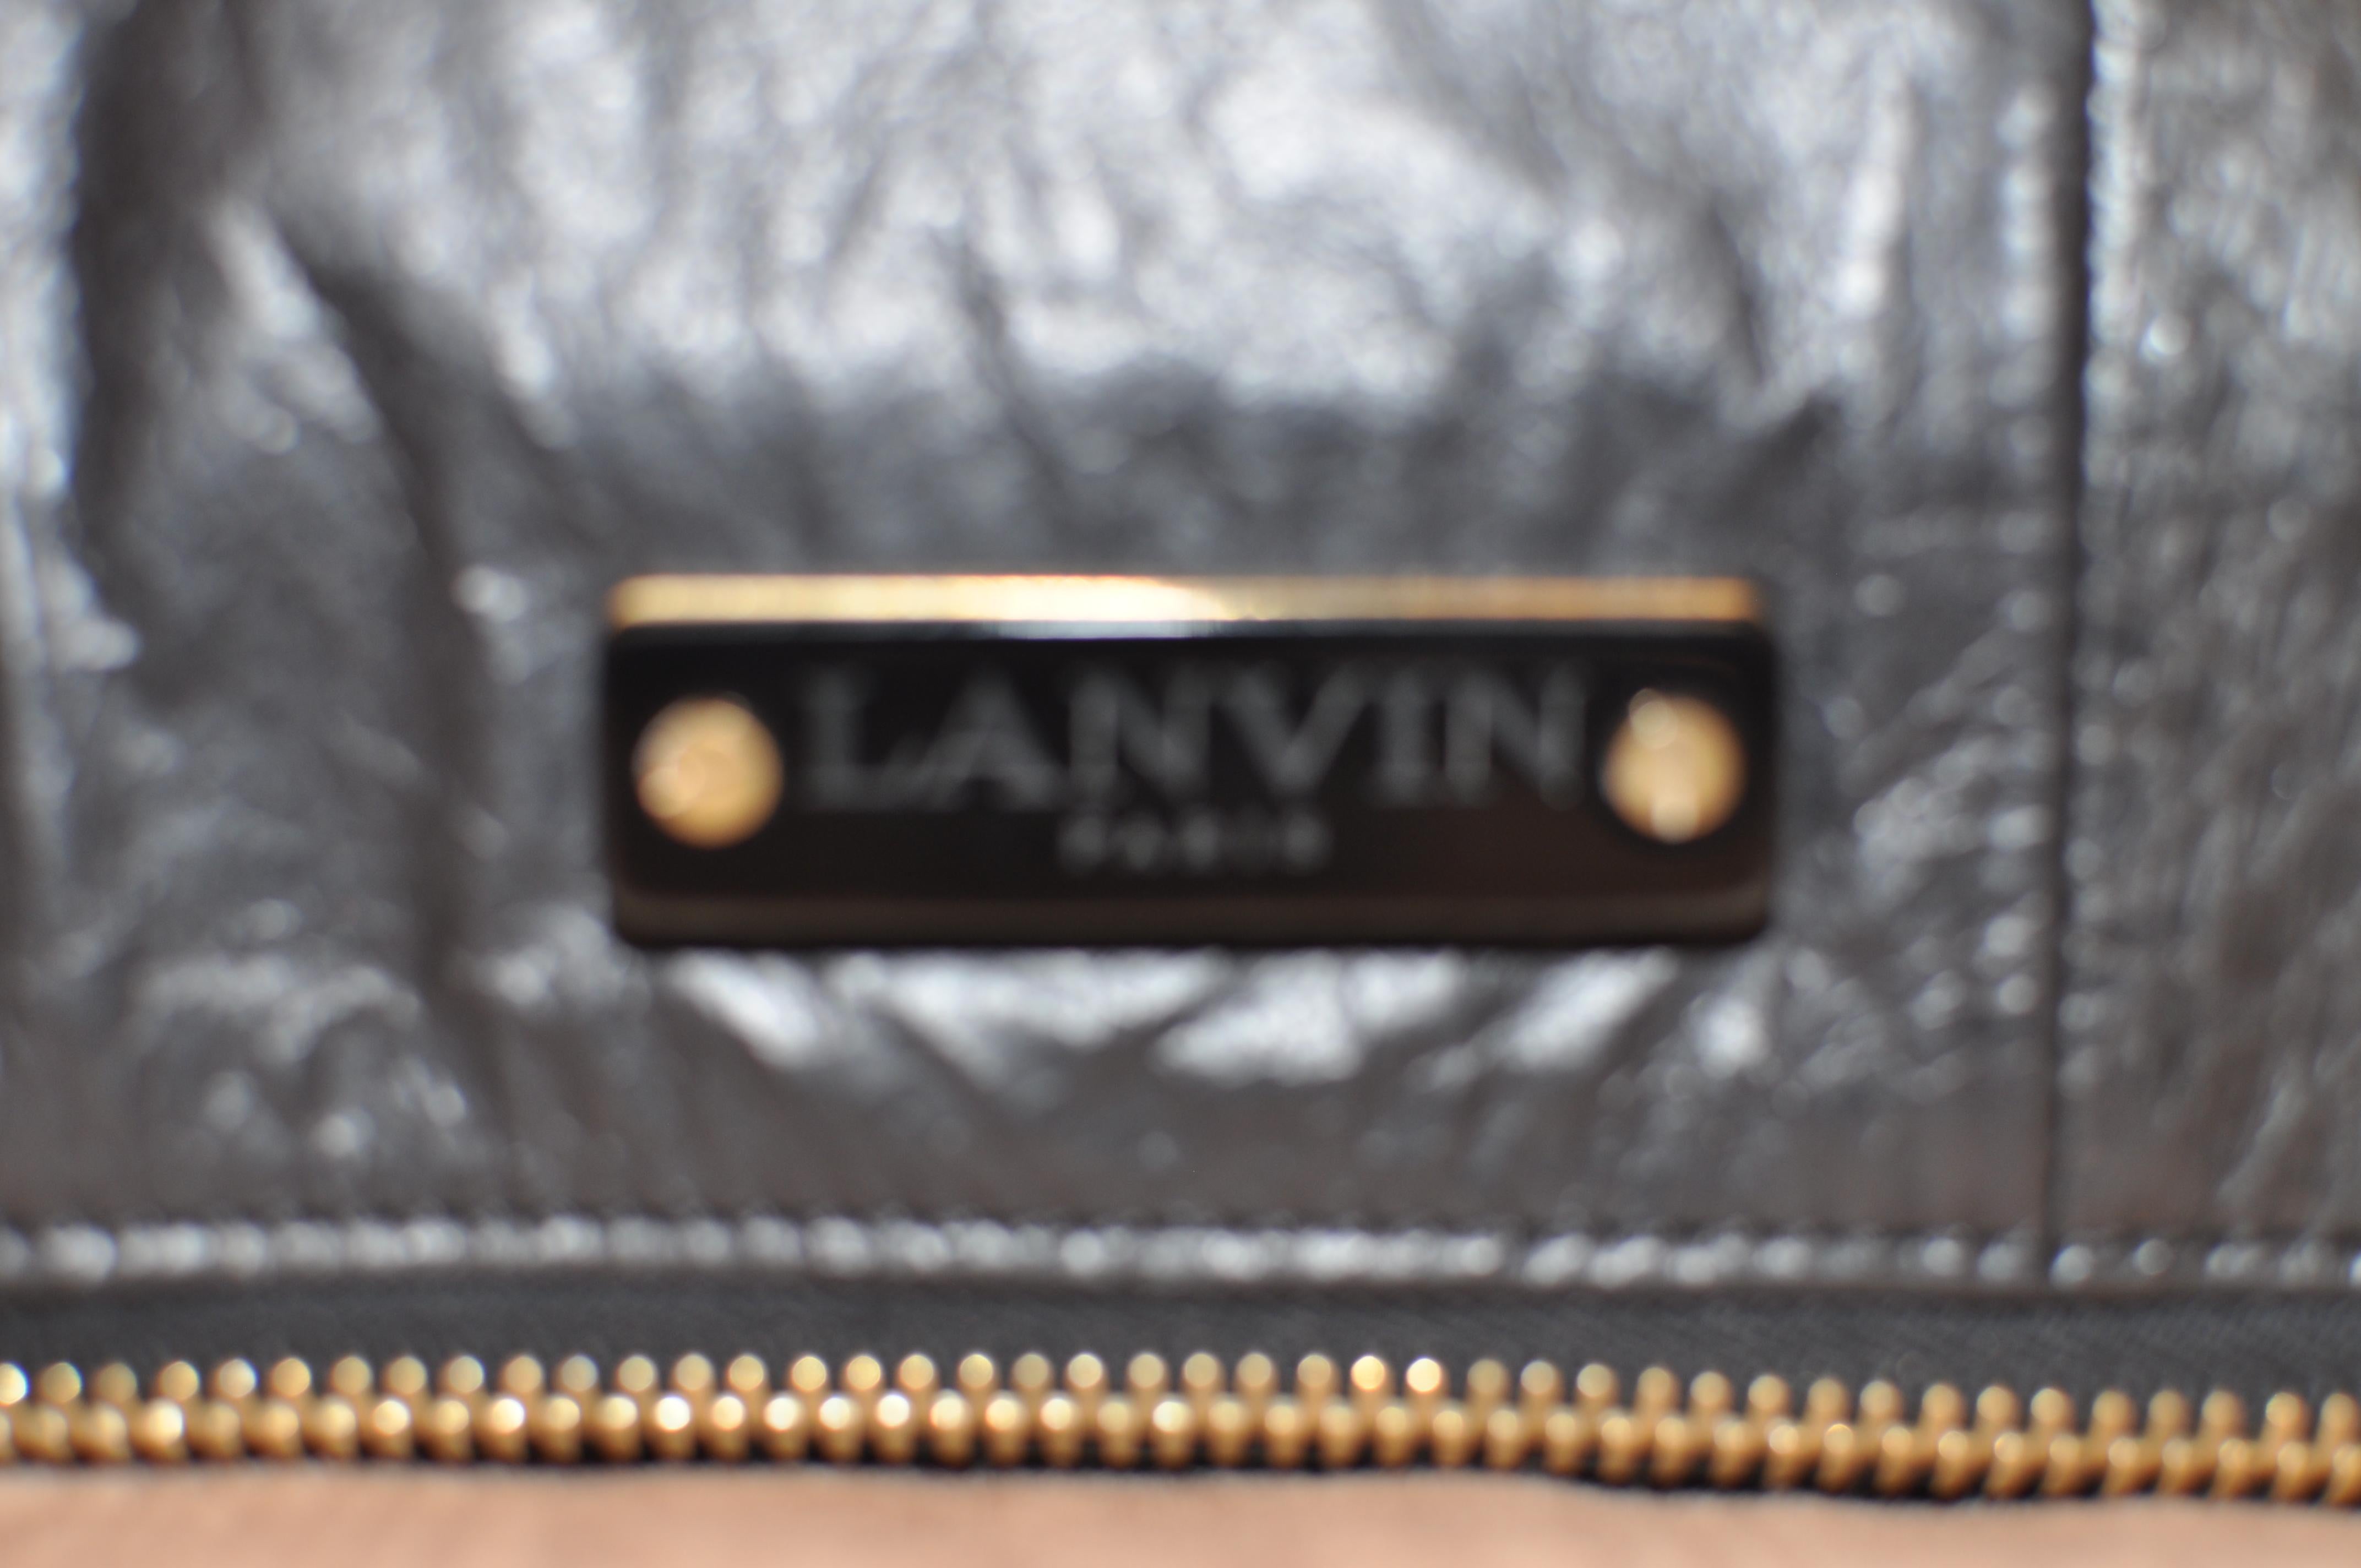 This is a foldover flap clutch/handbag, which we believe is from the 2015 collection. Materials are patent leather and reptile. The bag has a wide wraparound zipper, fold over and closure is by a magnetic strip. The inside lining is gold with a